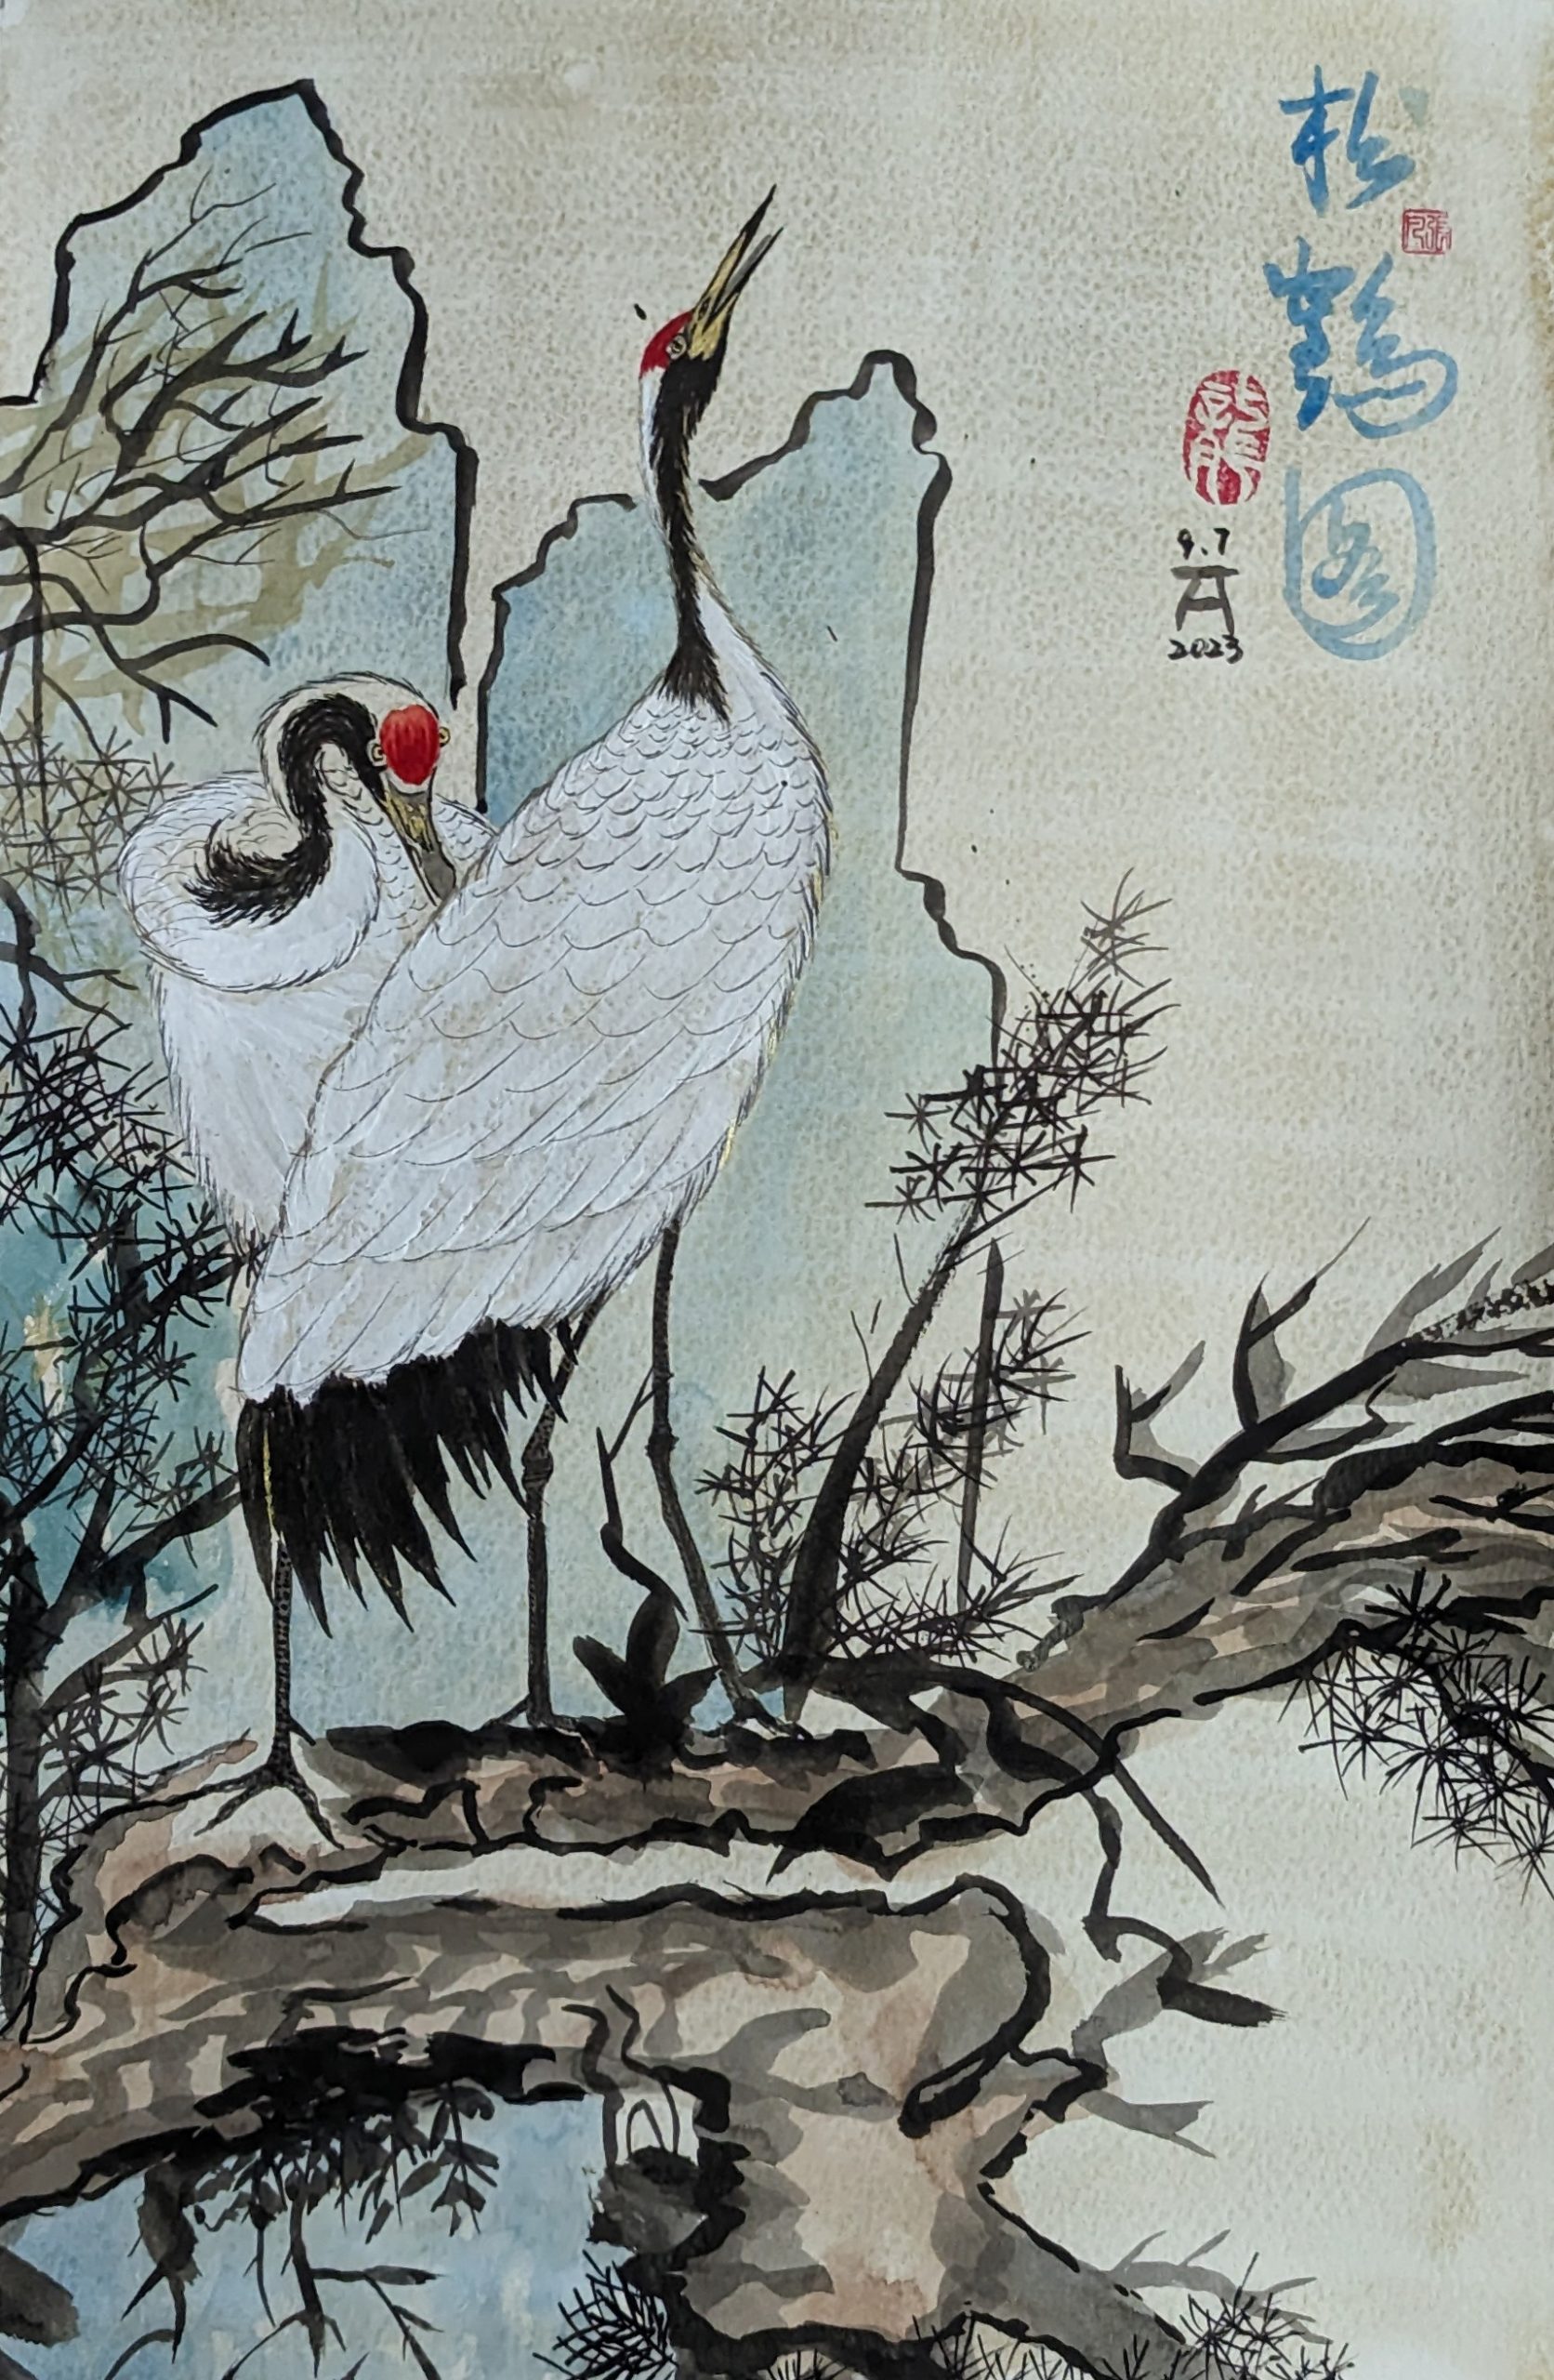 Cranes And Pine - Ming Dynasty Lin Liang (明代林良 松鹤图）by Fan Stanbrough